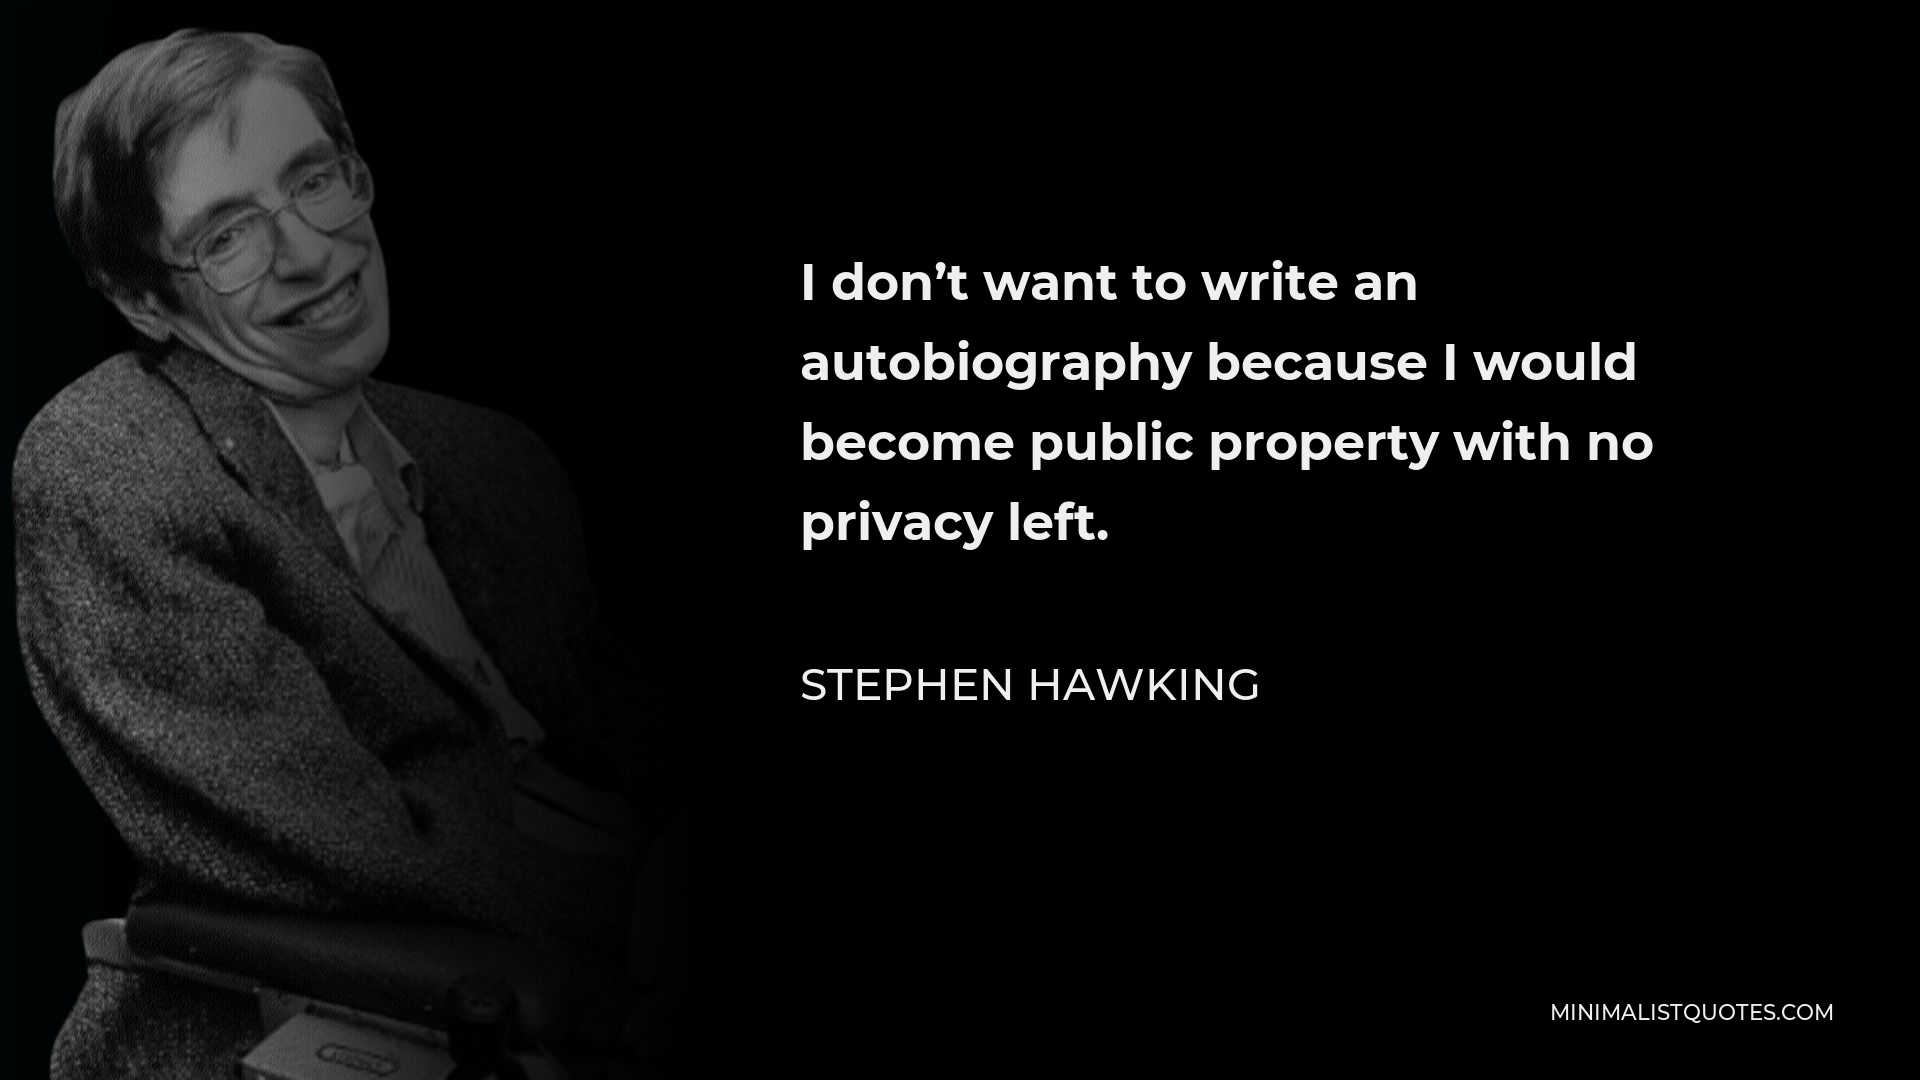 Stephen Hawking Quote - I don’t want to write an autobiography because I would become public property with no privacy left.